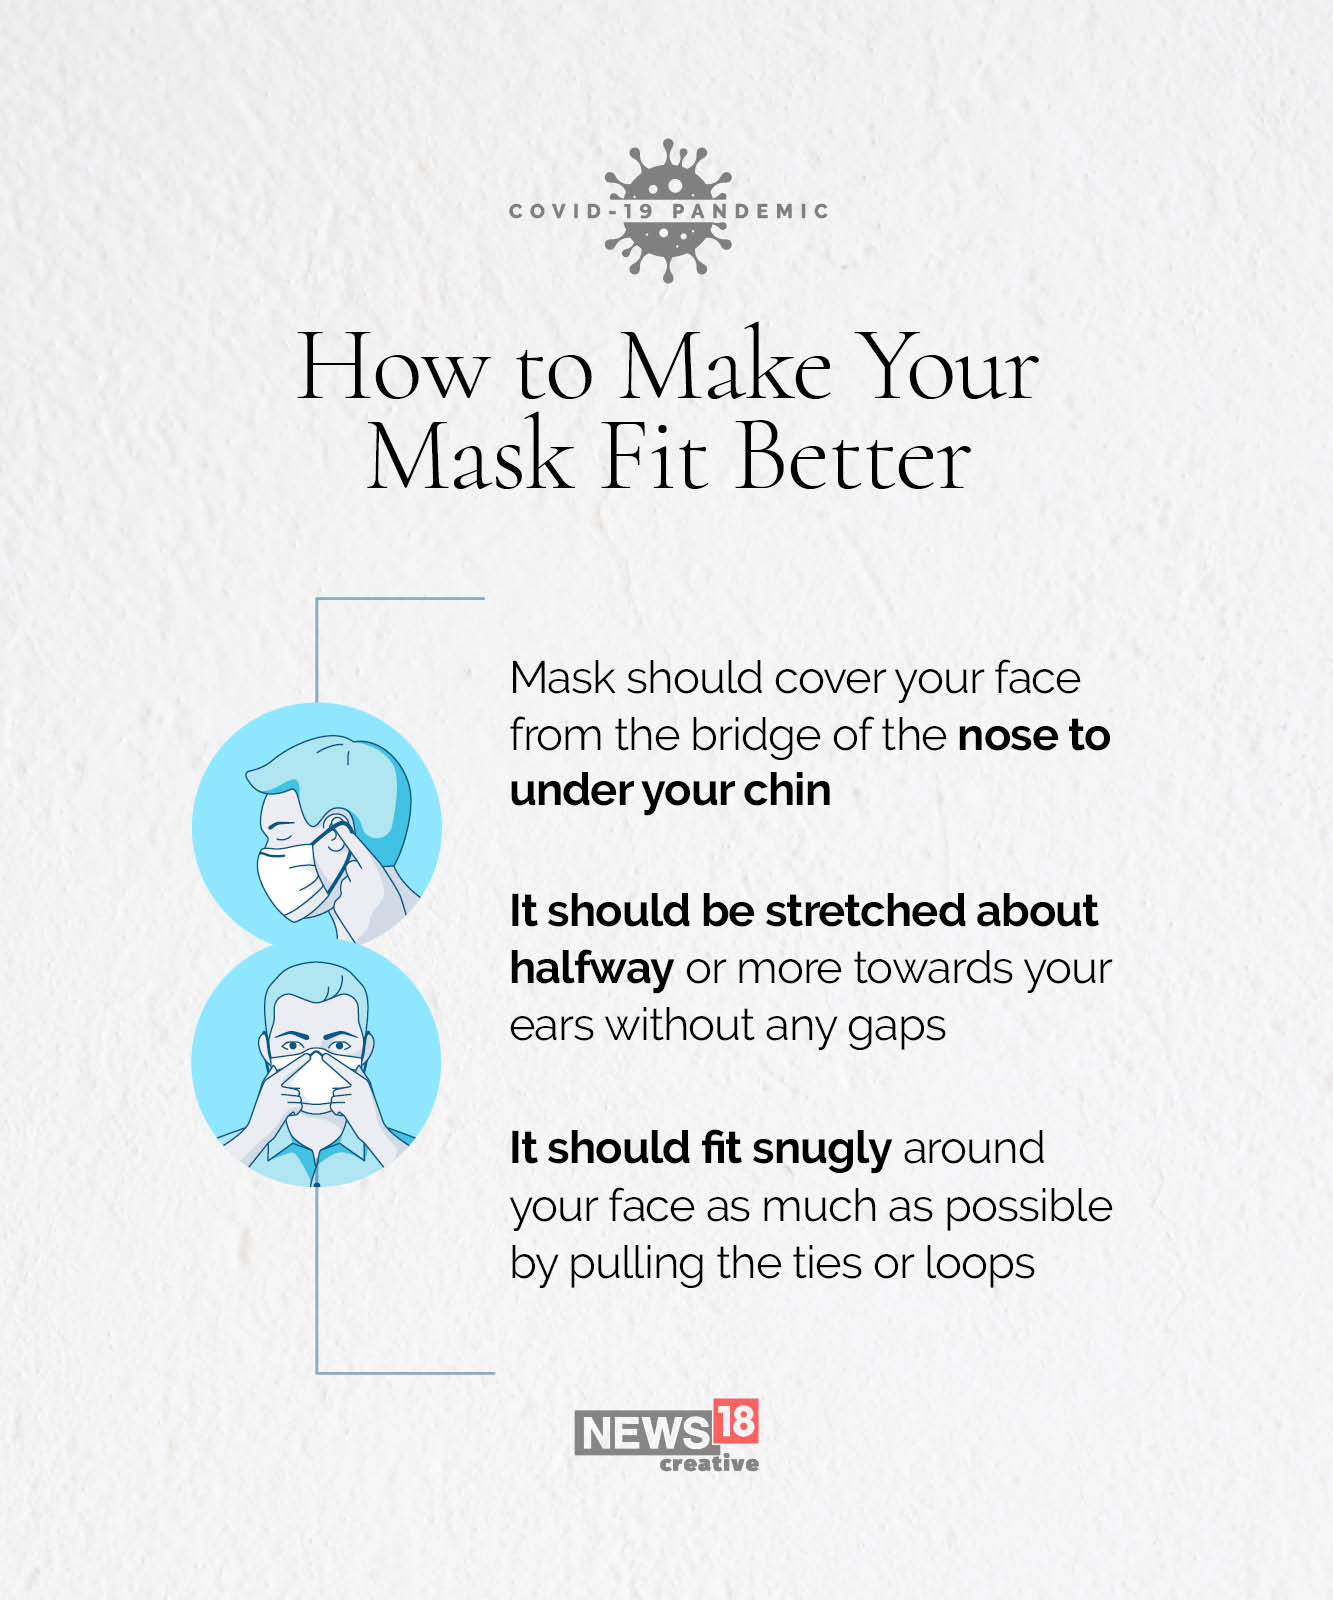 Make your mask work better, and longer